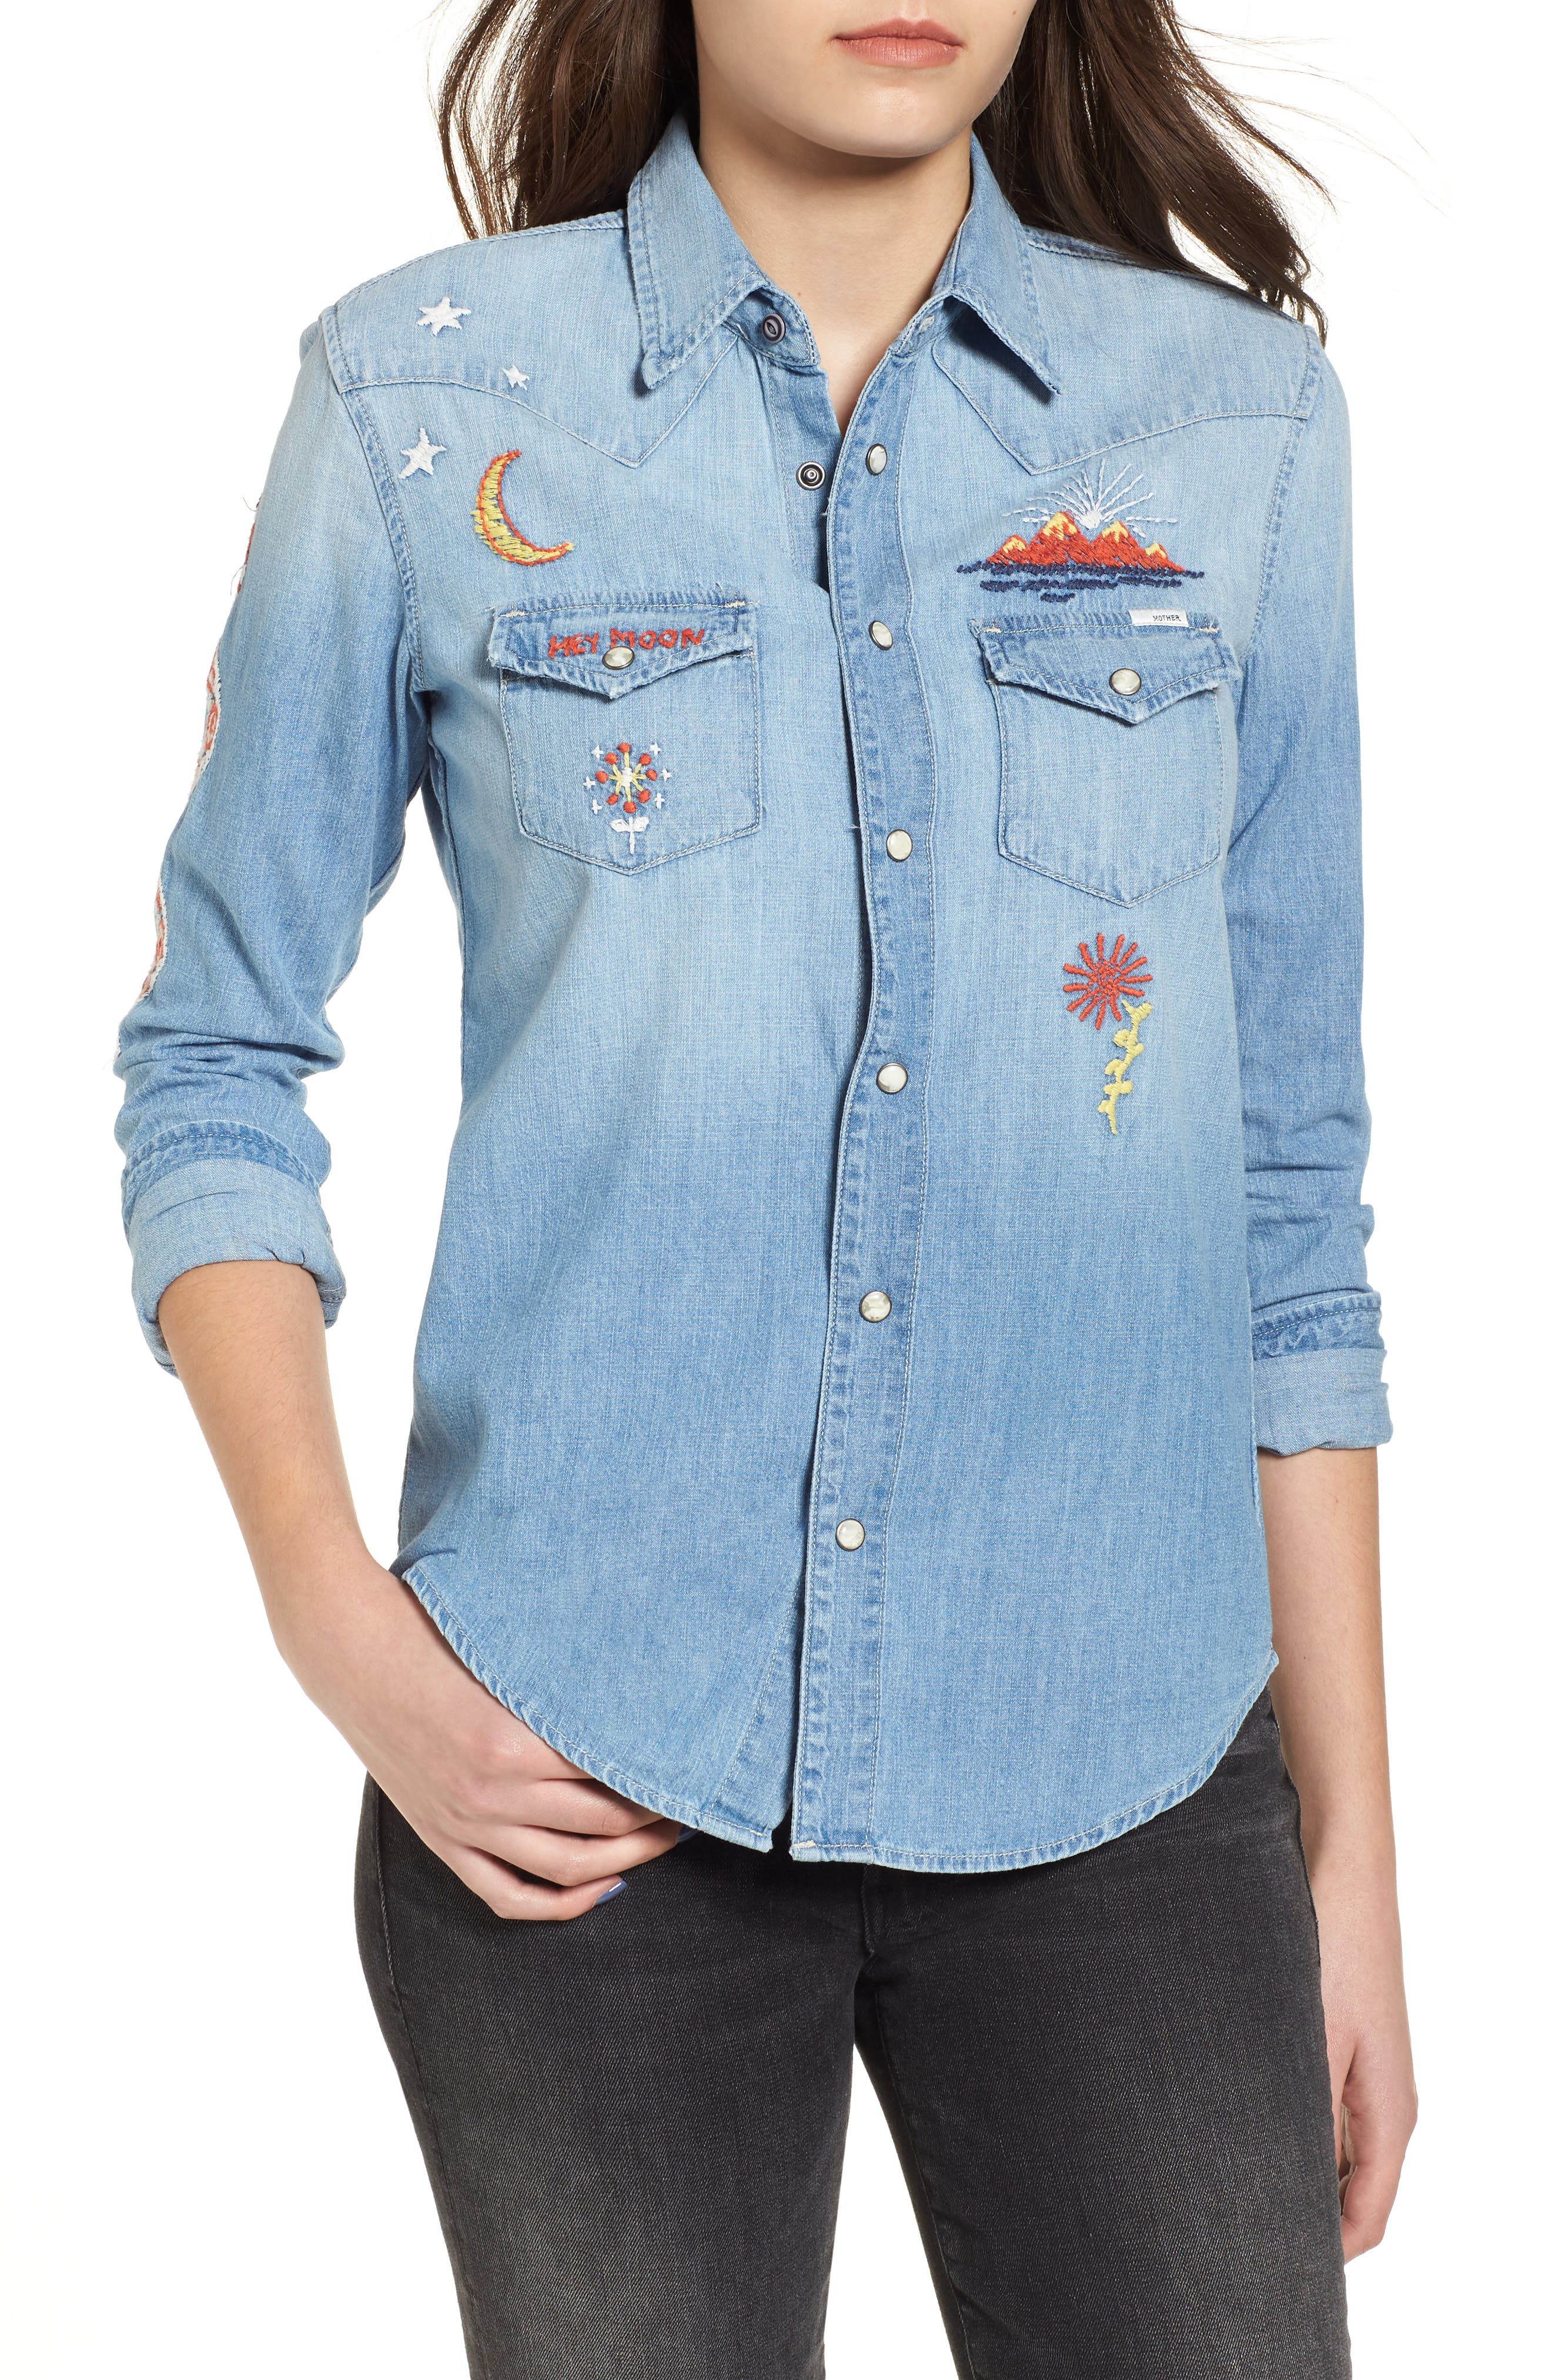 embroidered jean shirt